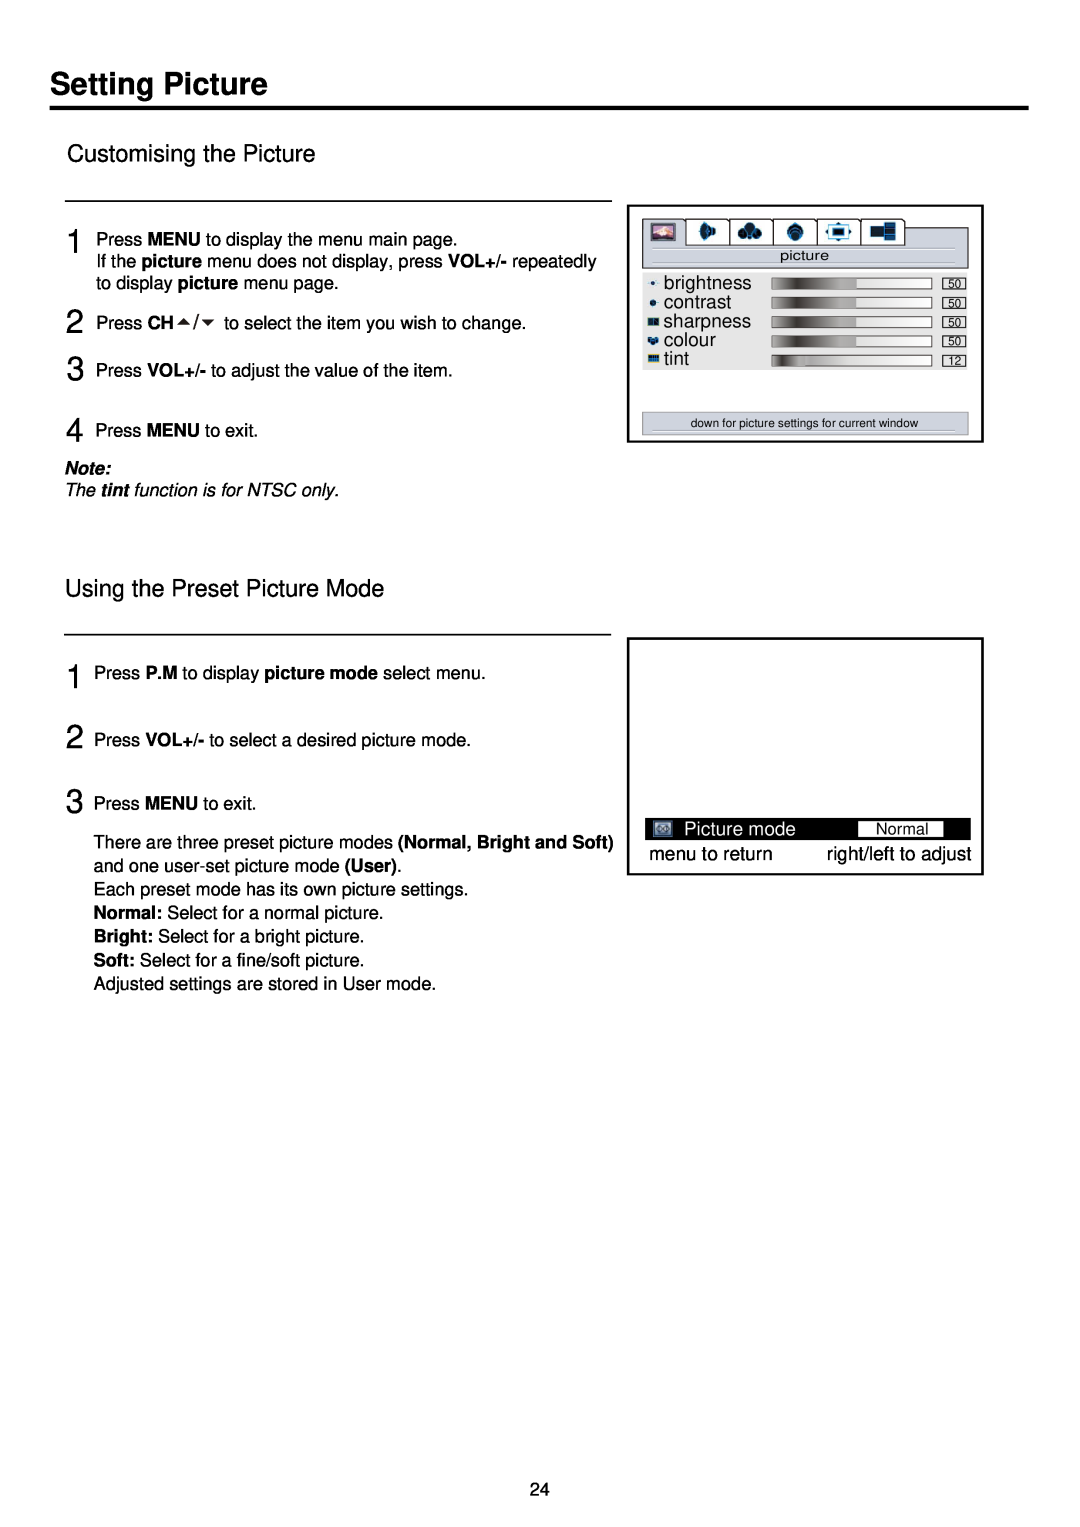 Palsonic PDP4200 owner manual Setting Picture, Customising the Picture, Using the Preset Picture Mode, Picture mode 